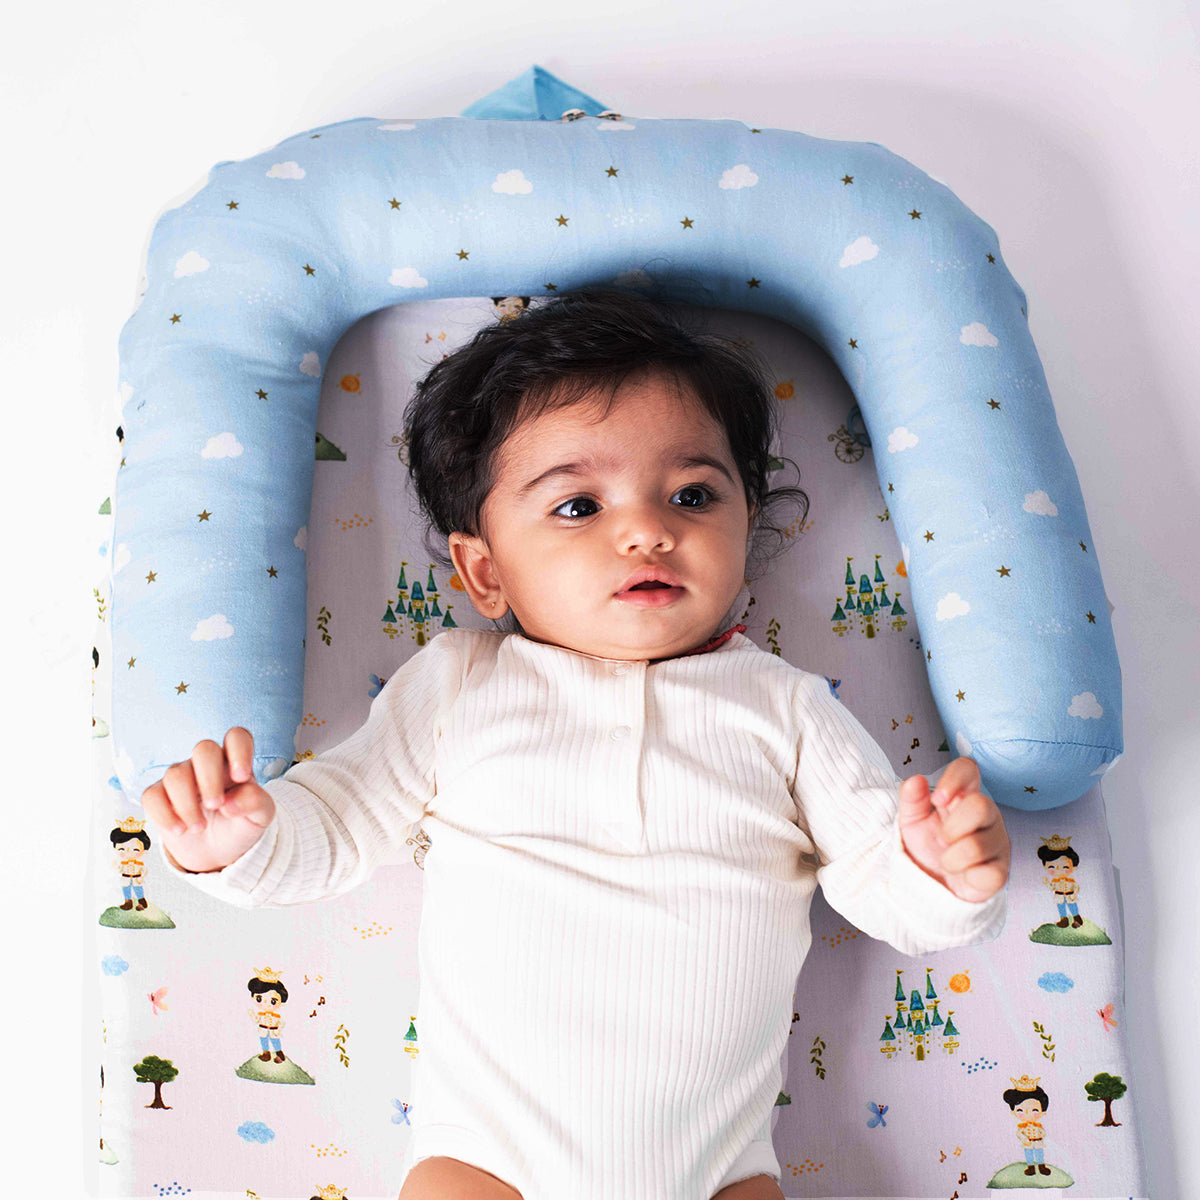 Tiny snooze foldable baby bed- the little prince